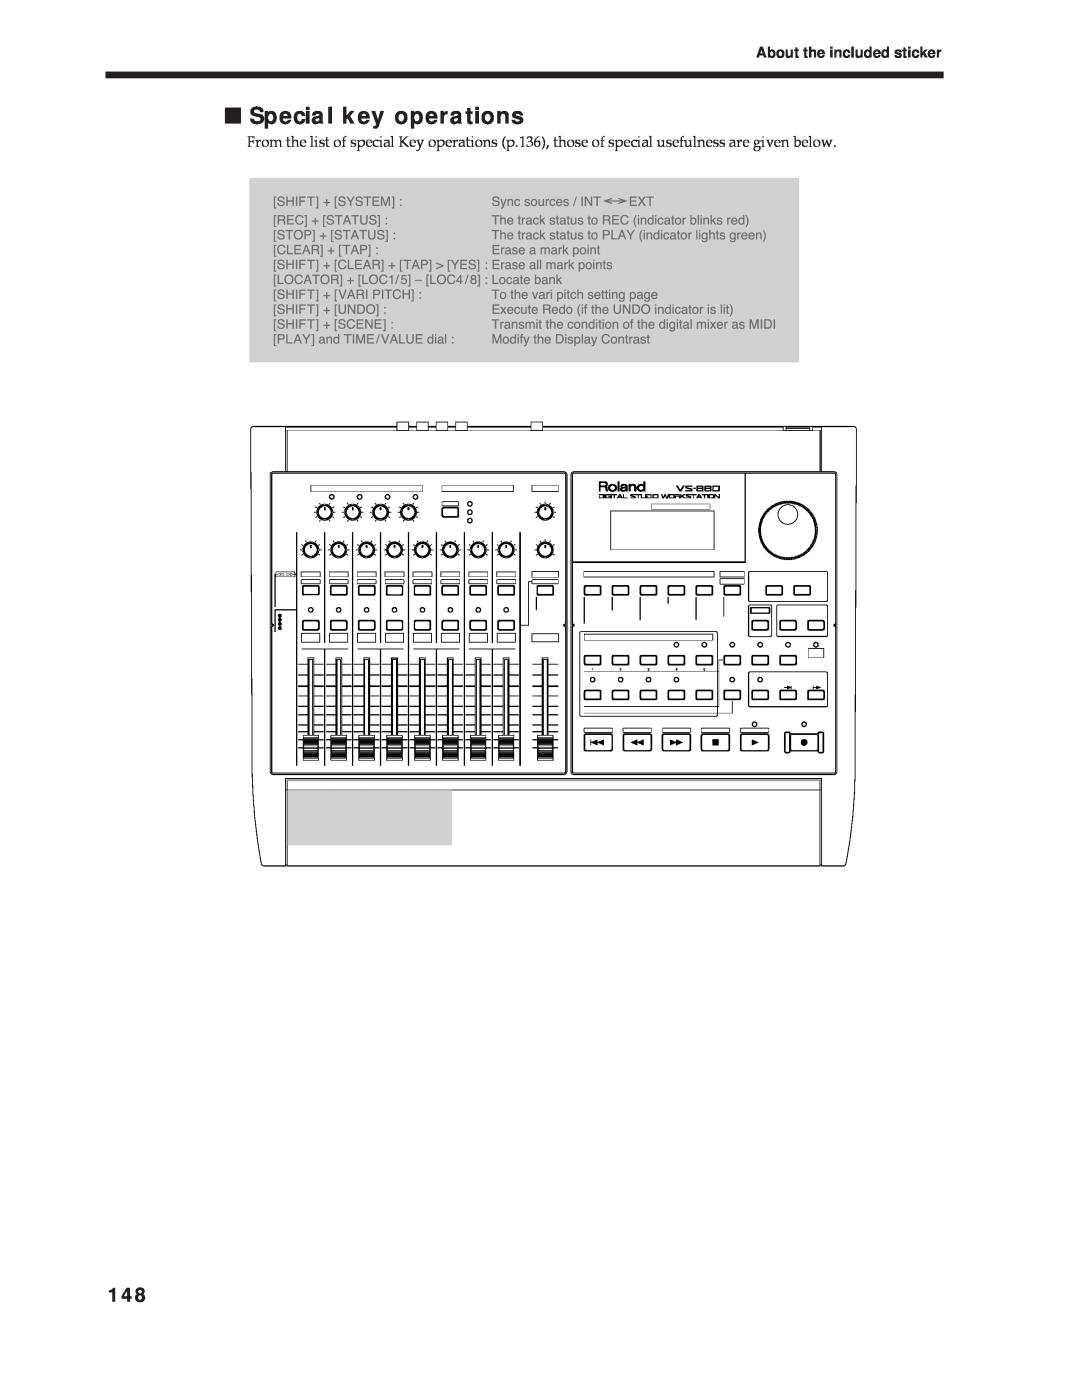 Roland Vs-880 important safety instructions Special key operations, About the included sticker 